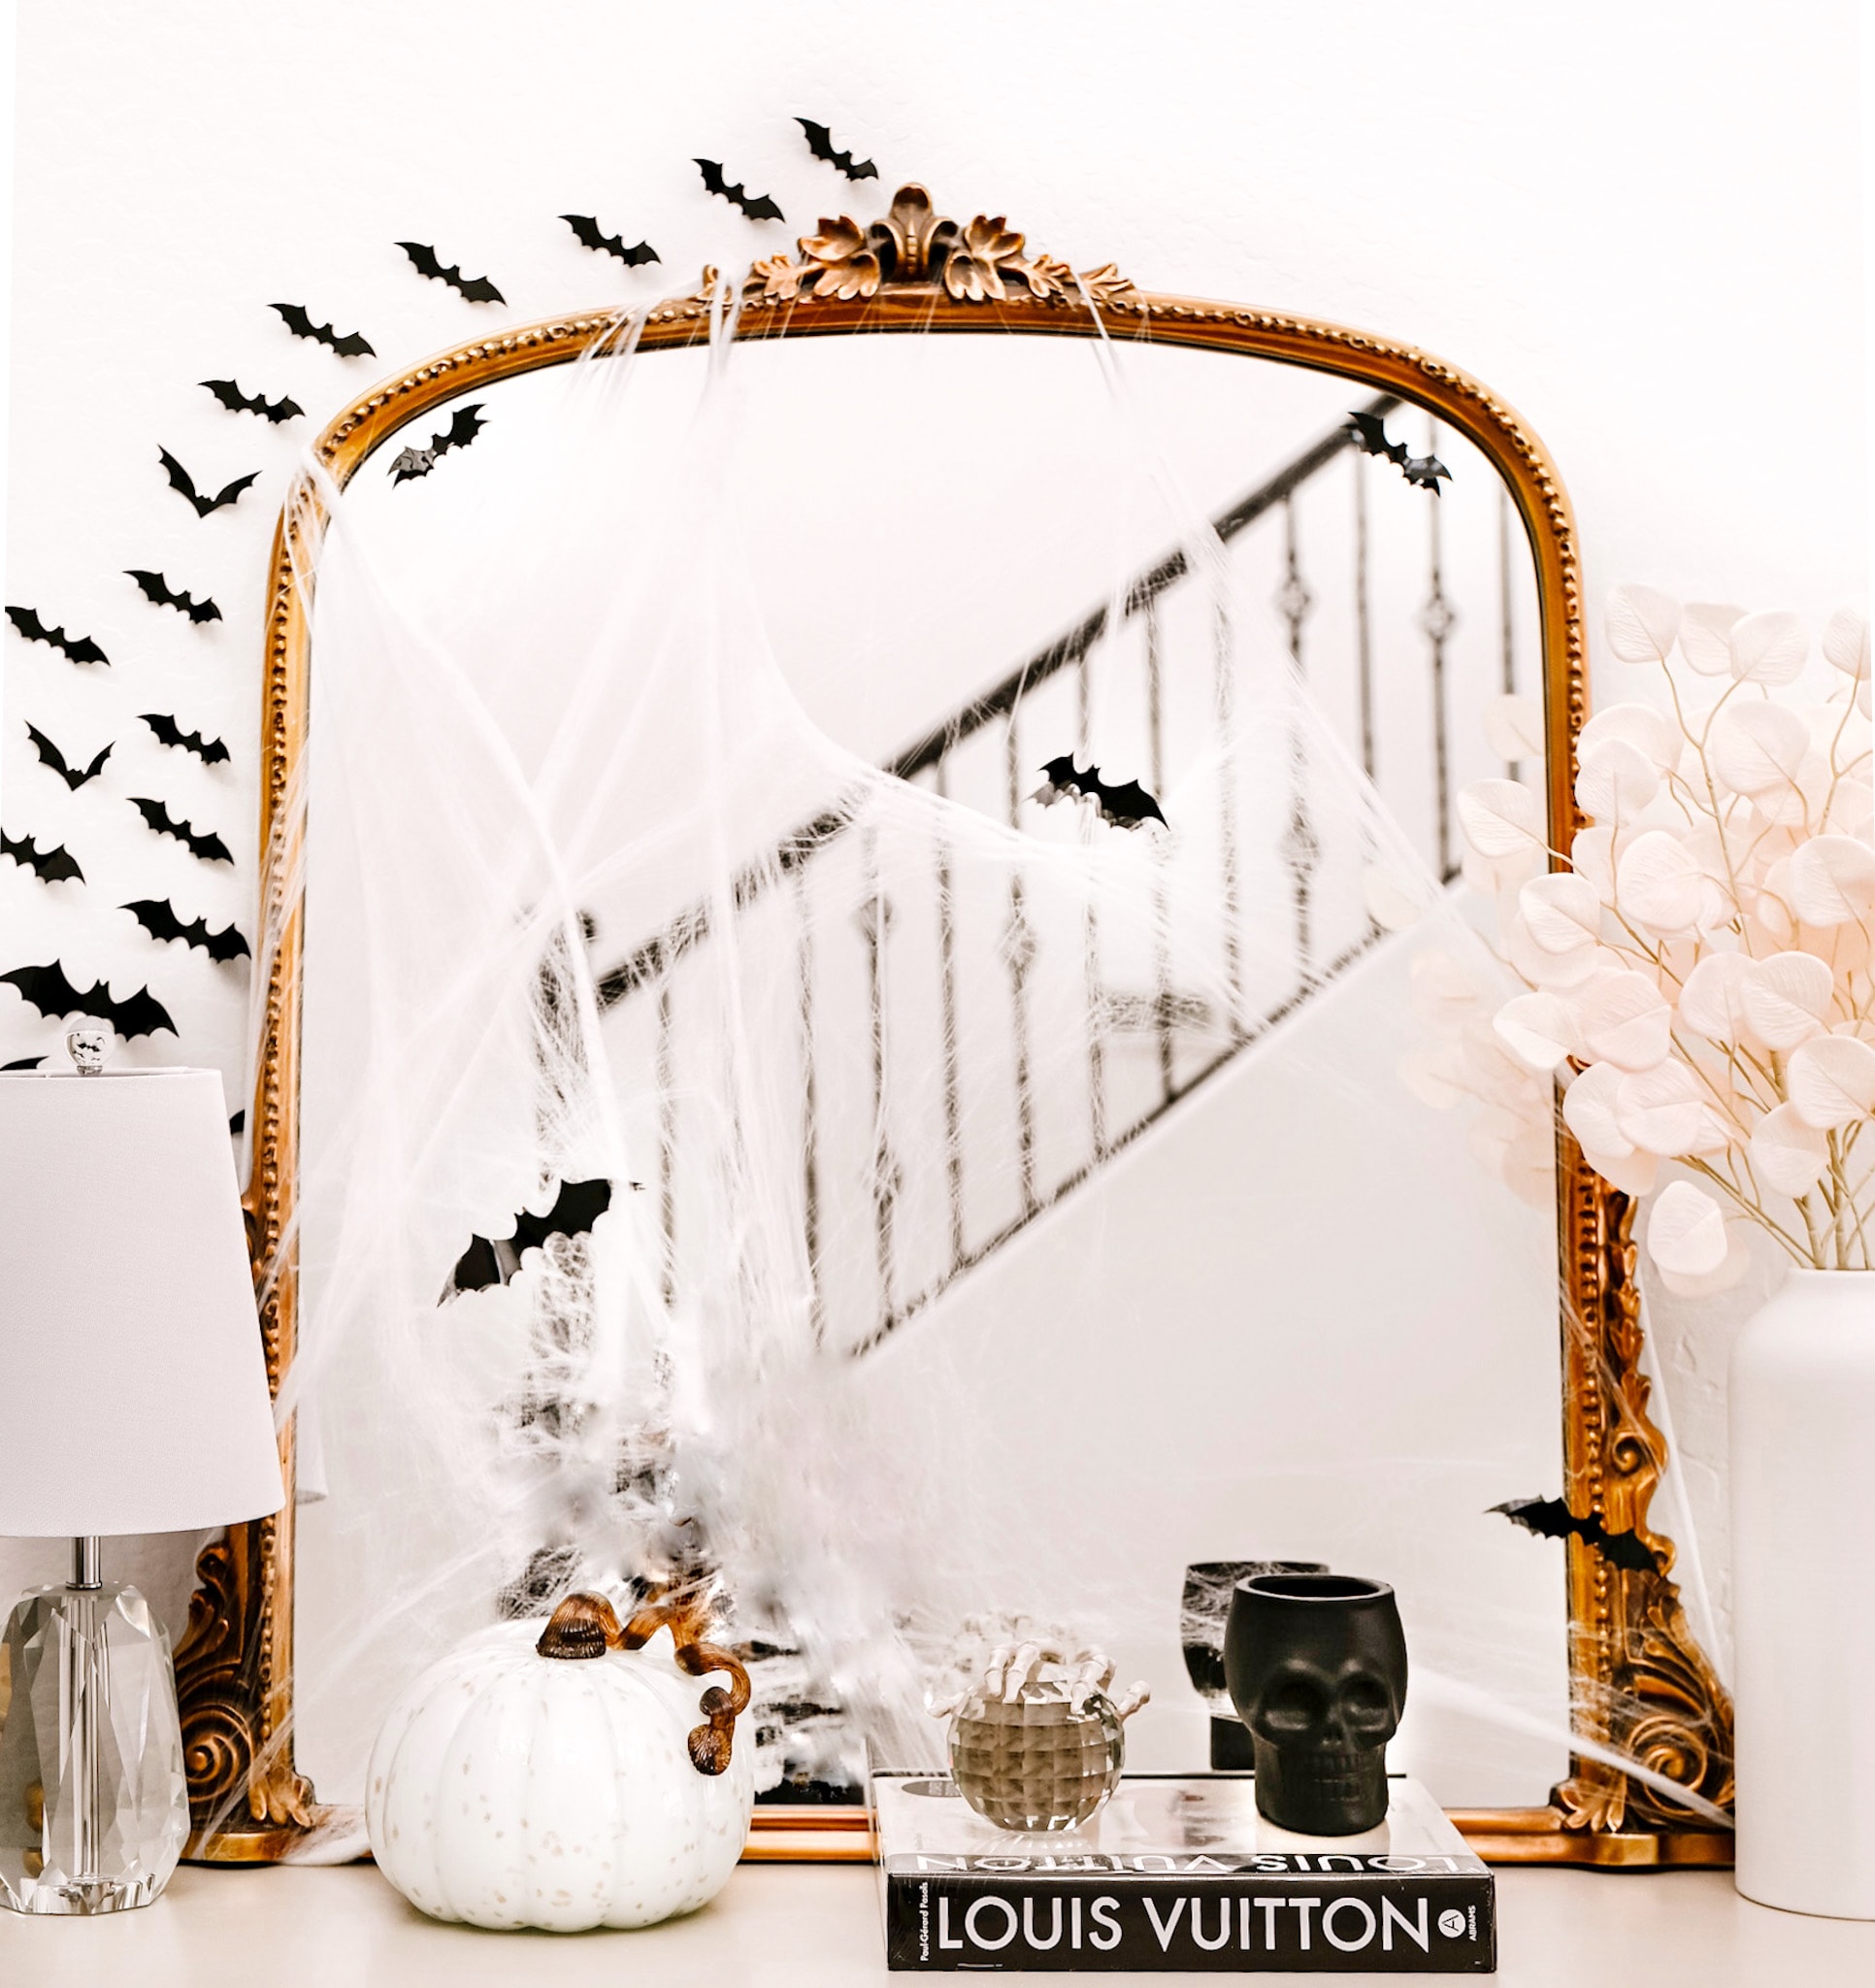 gold mirror with bats and cobwebs decorated on it. A white glass pumpkin sits on a dress next to a black skull, a crystal lamp, and white flowers in a vase